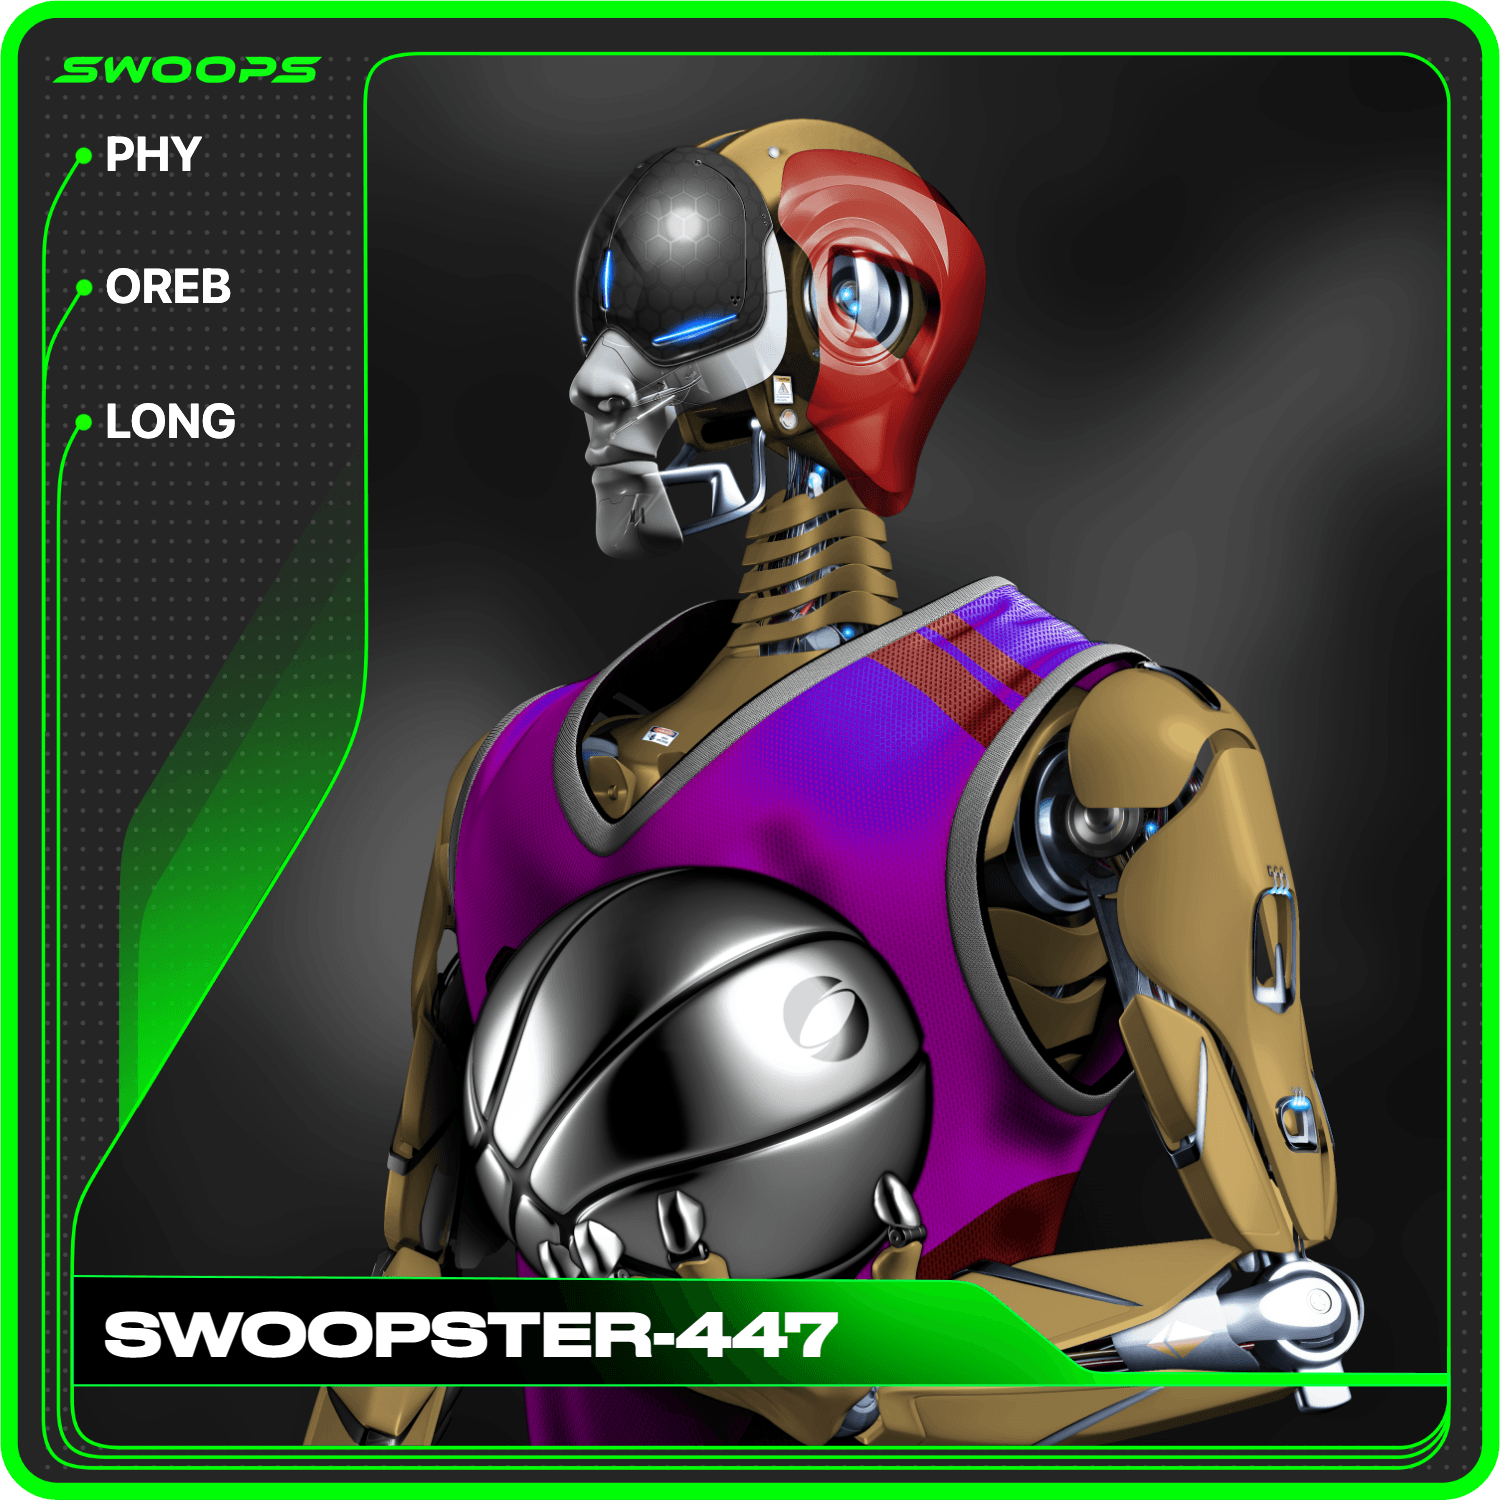 SWOOPSTER-447